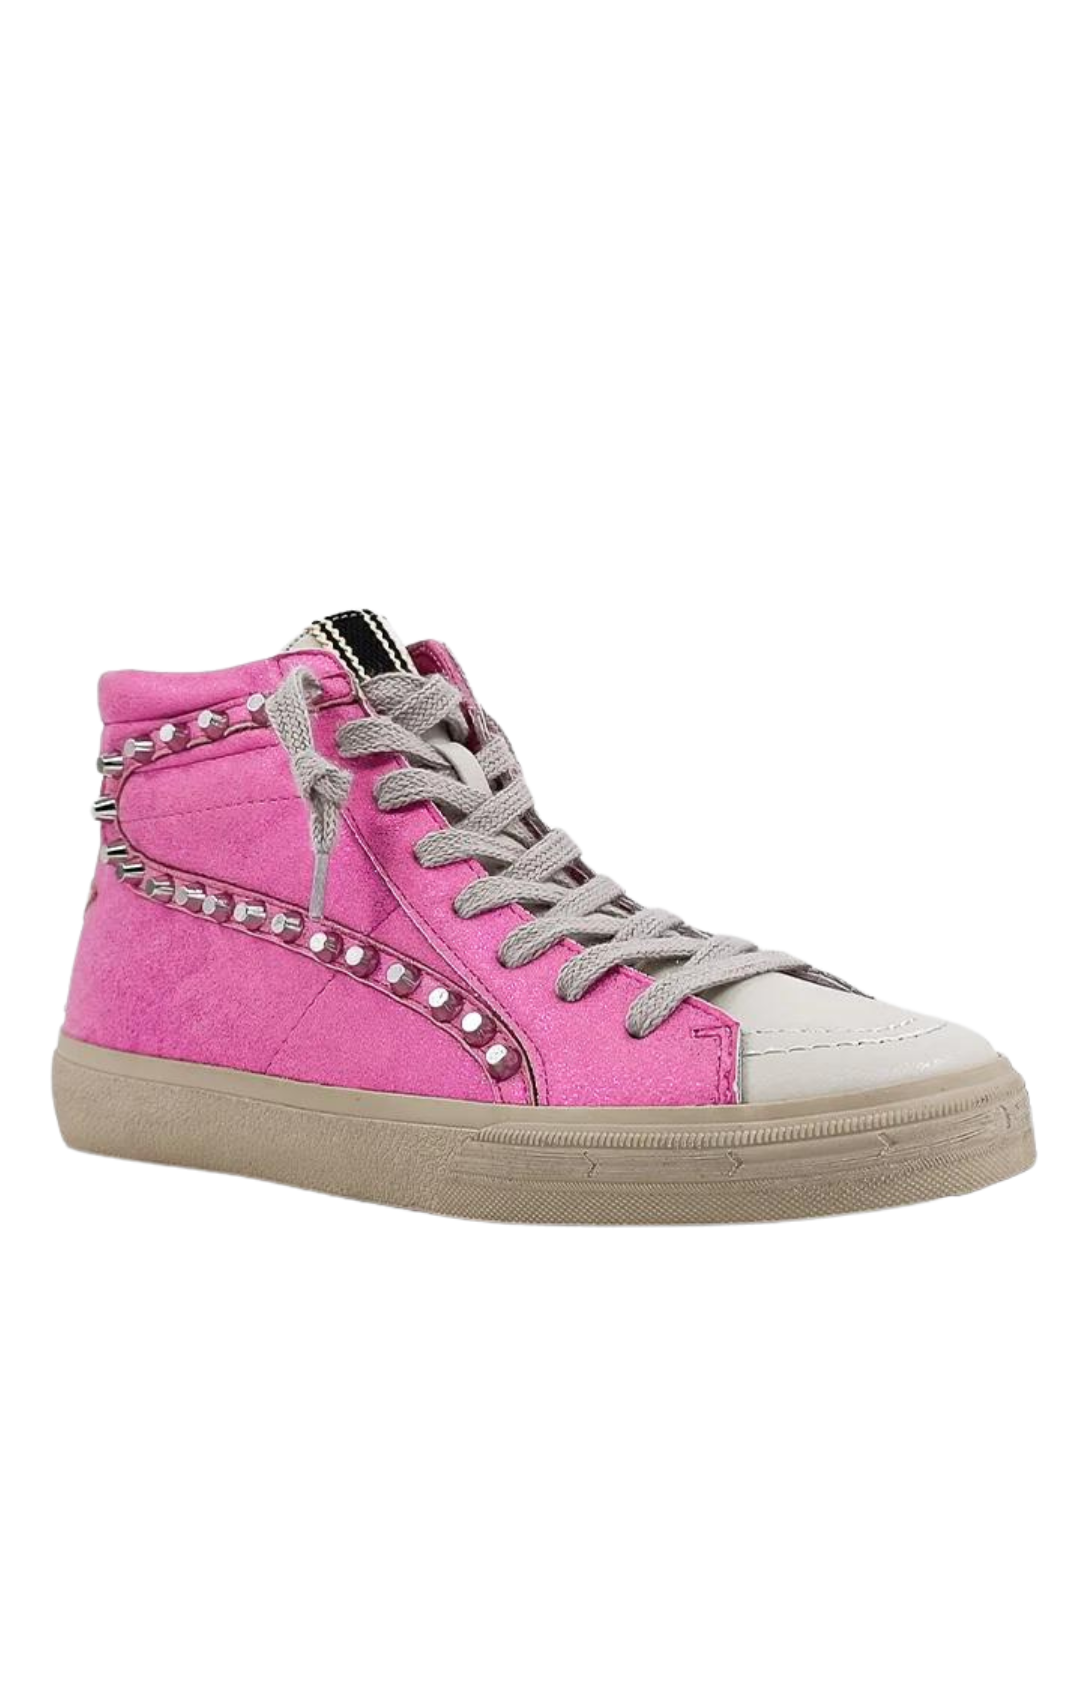 Rio High Top Sneakers by ShuShop